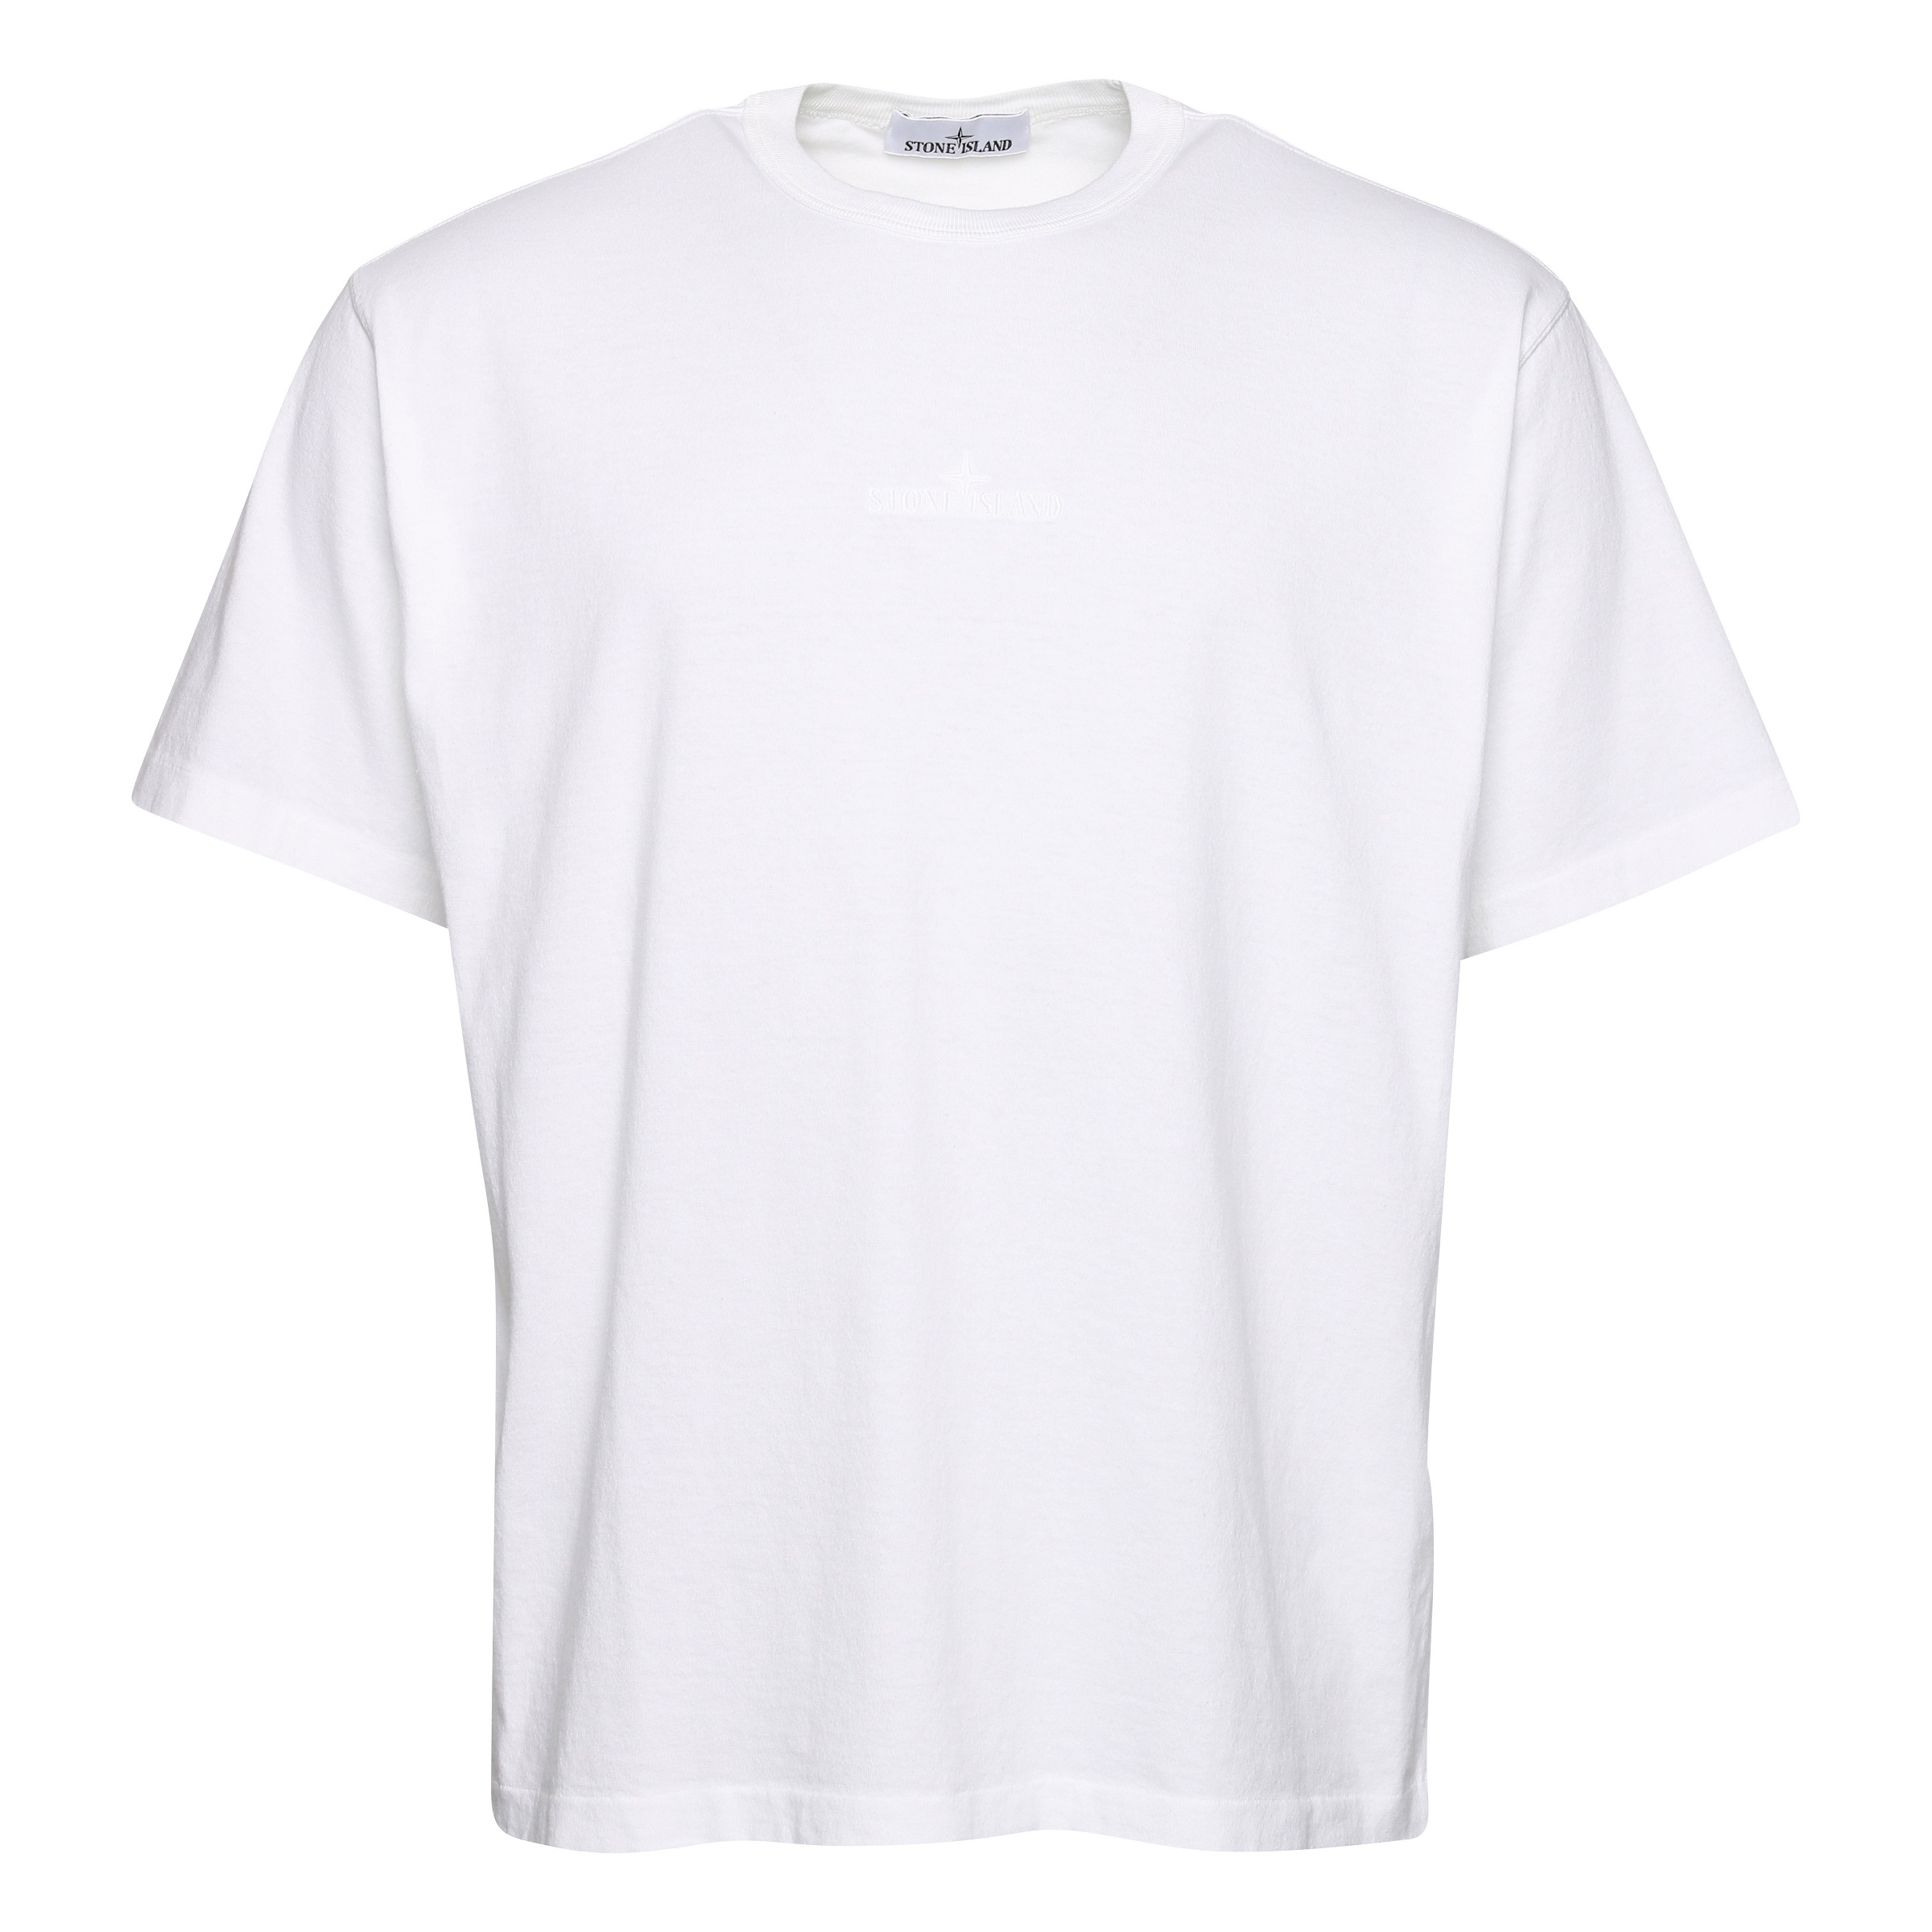 Stone Island Oversize Stamp T-Shirt in White